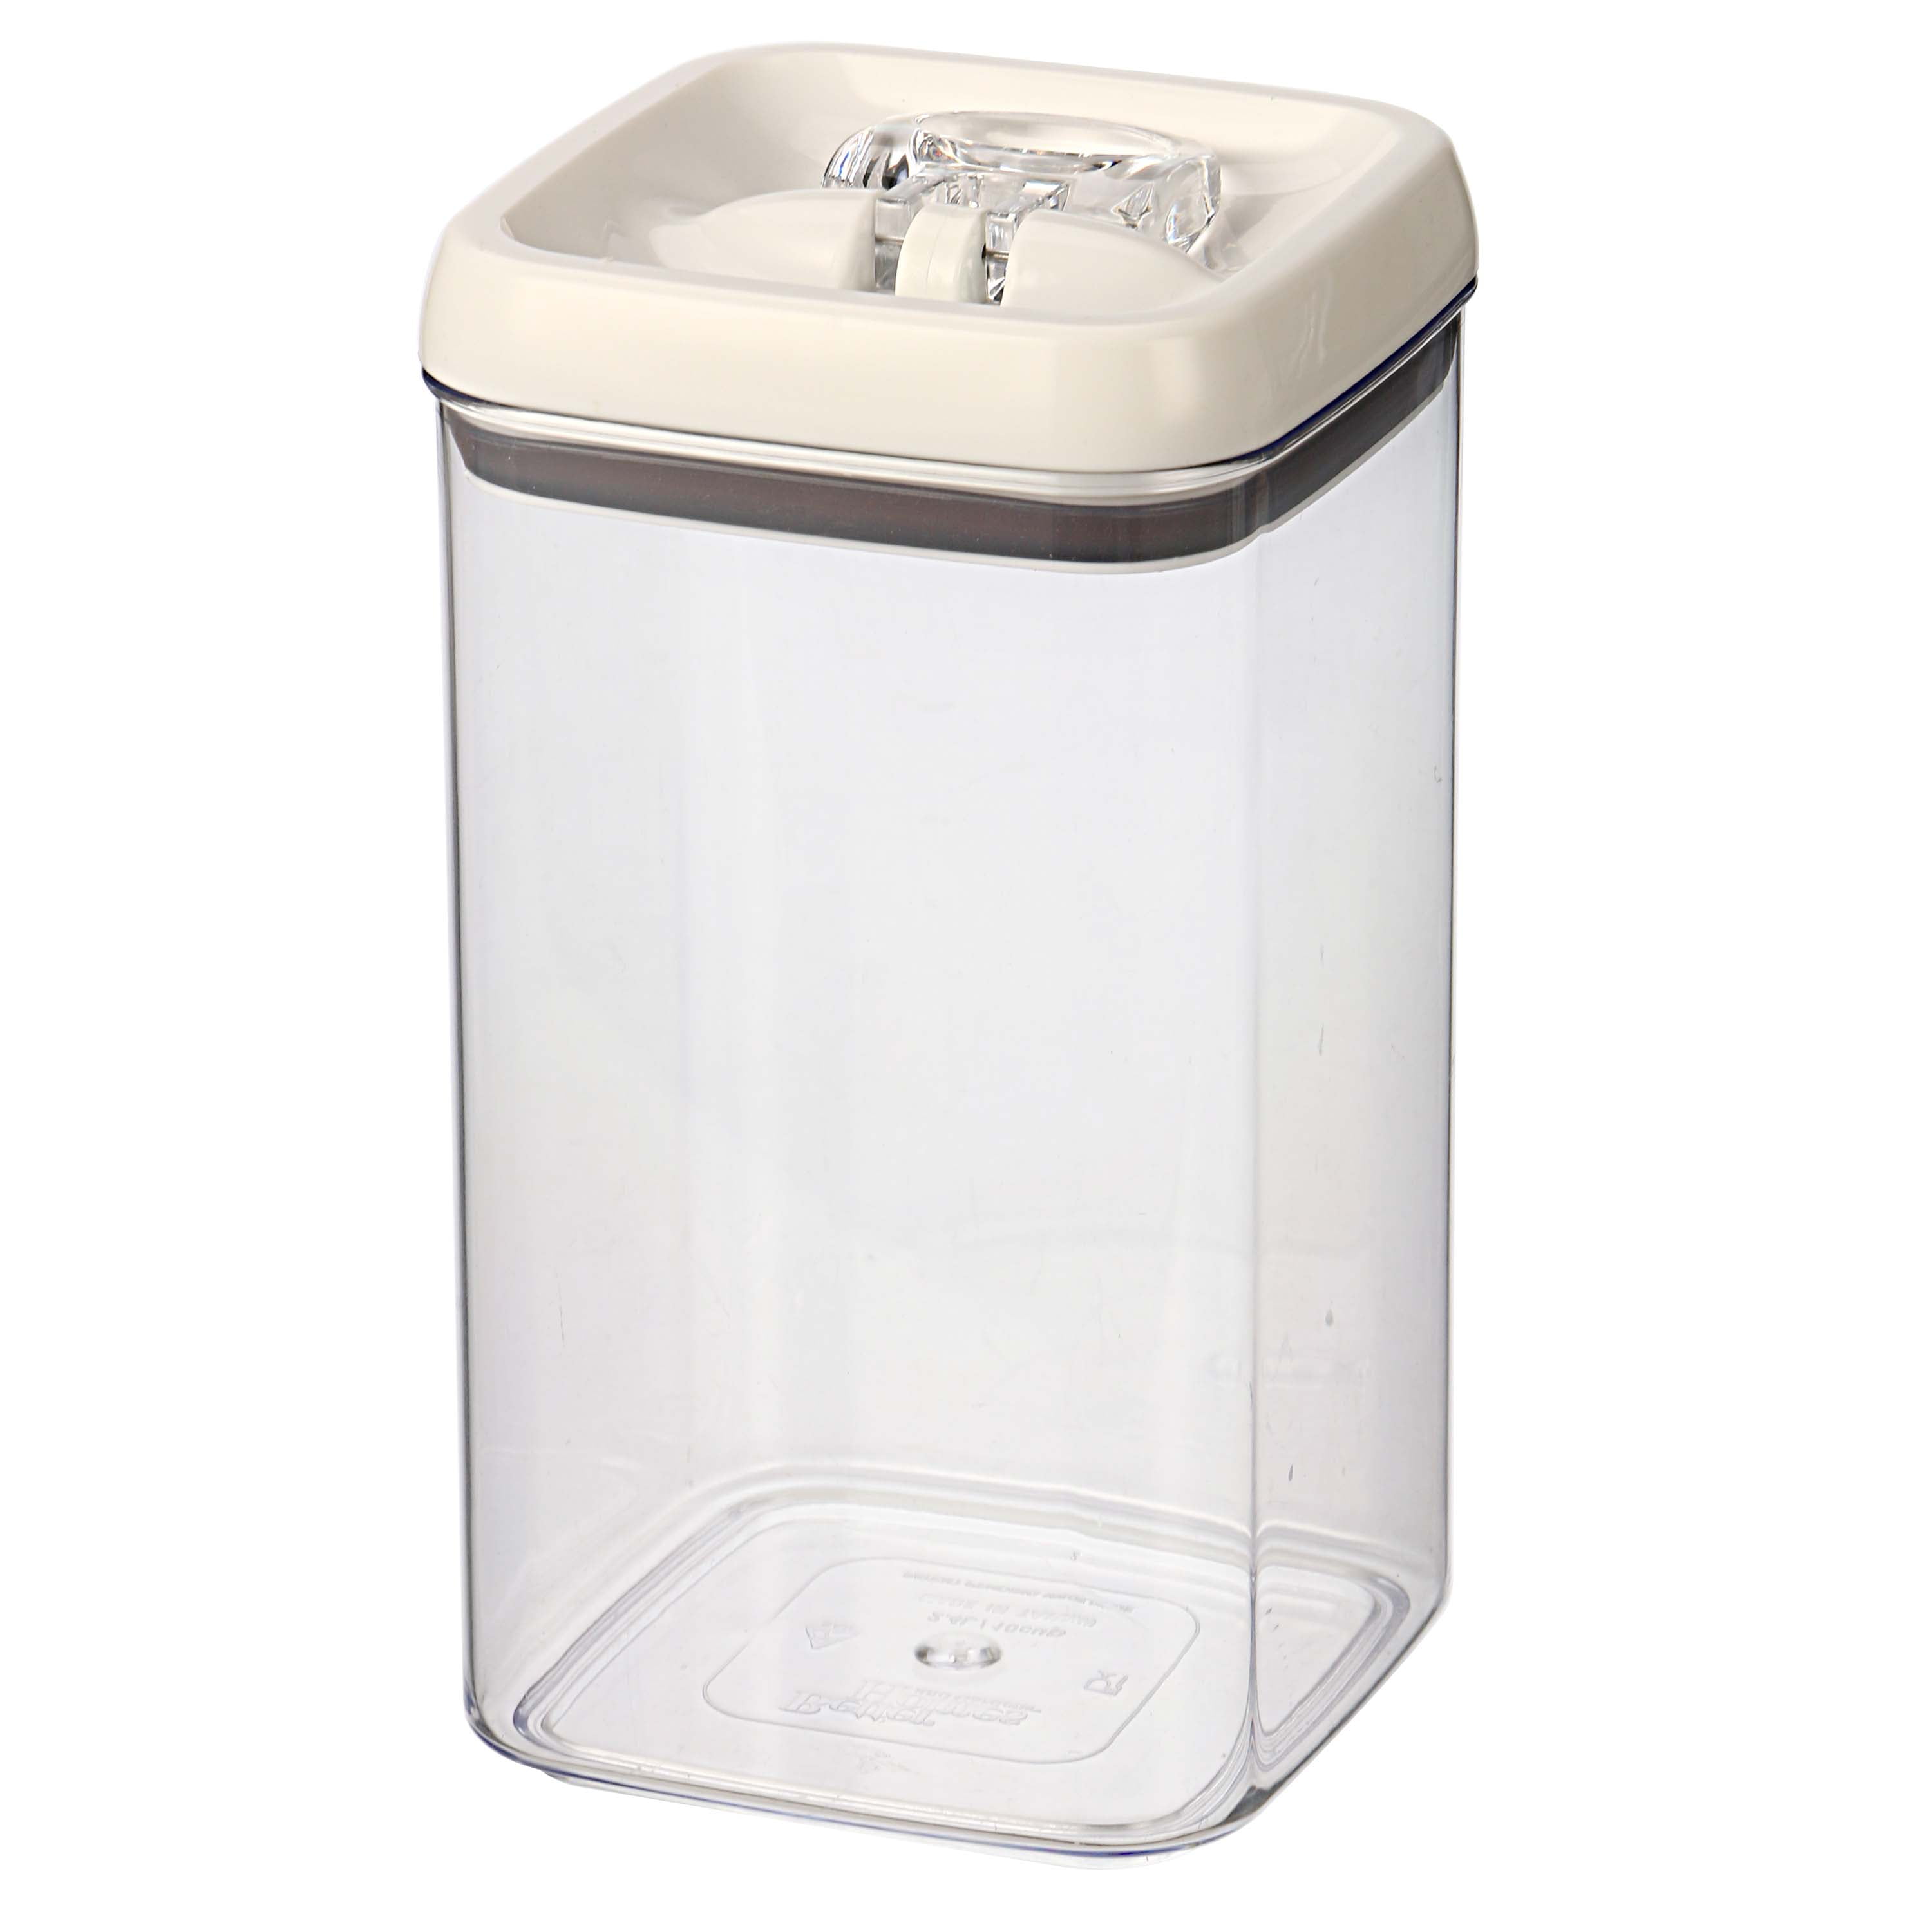 Felli Clear Flip-Tite Cookie Jar Container - Shop Food Storage at